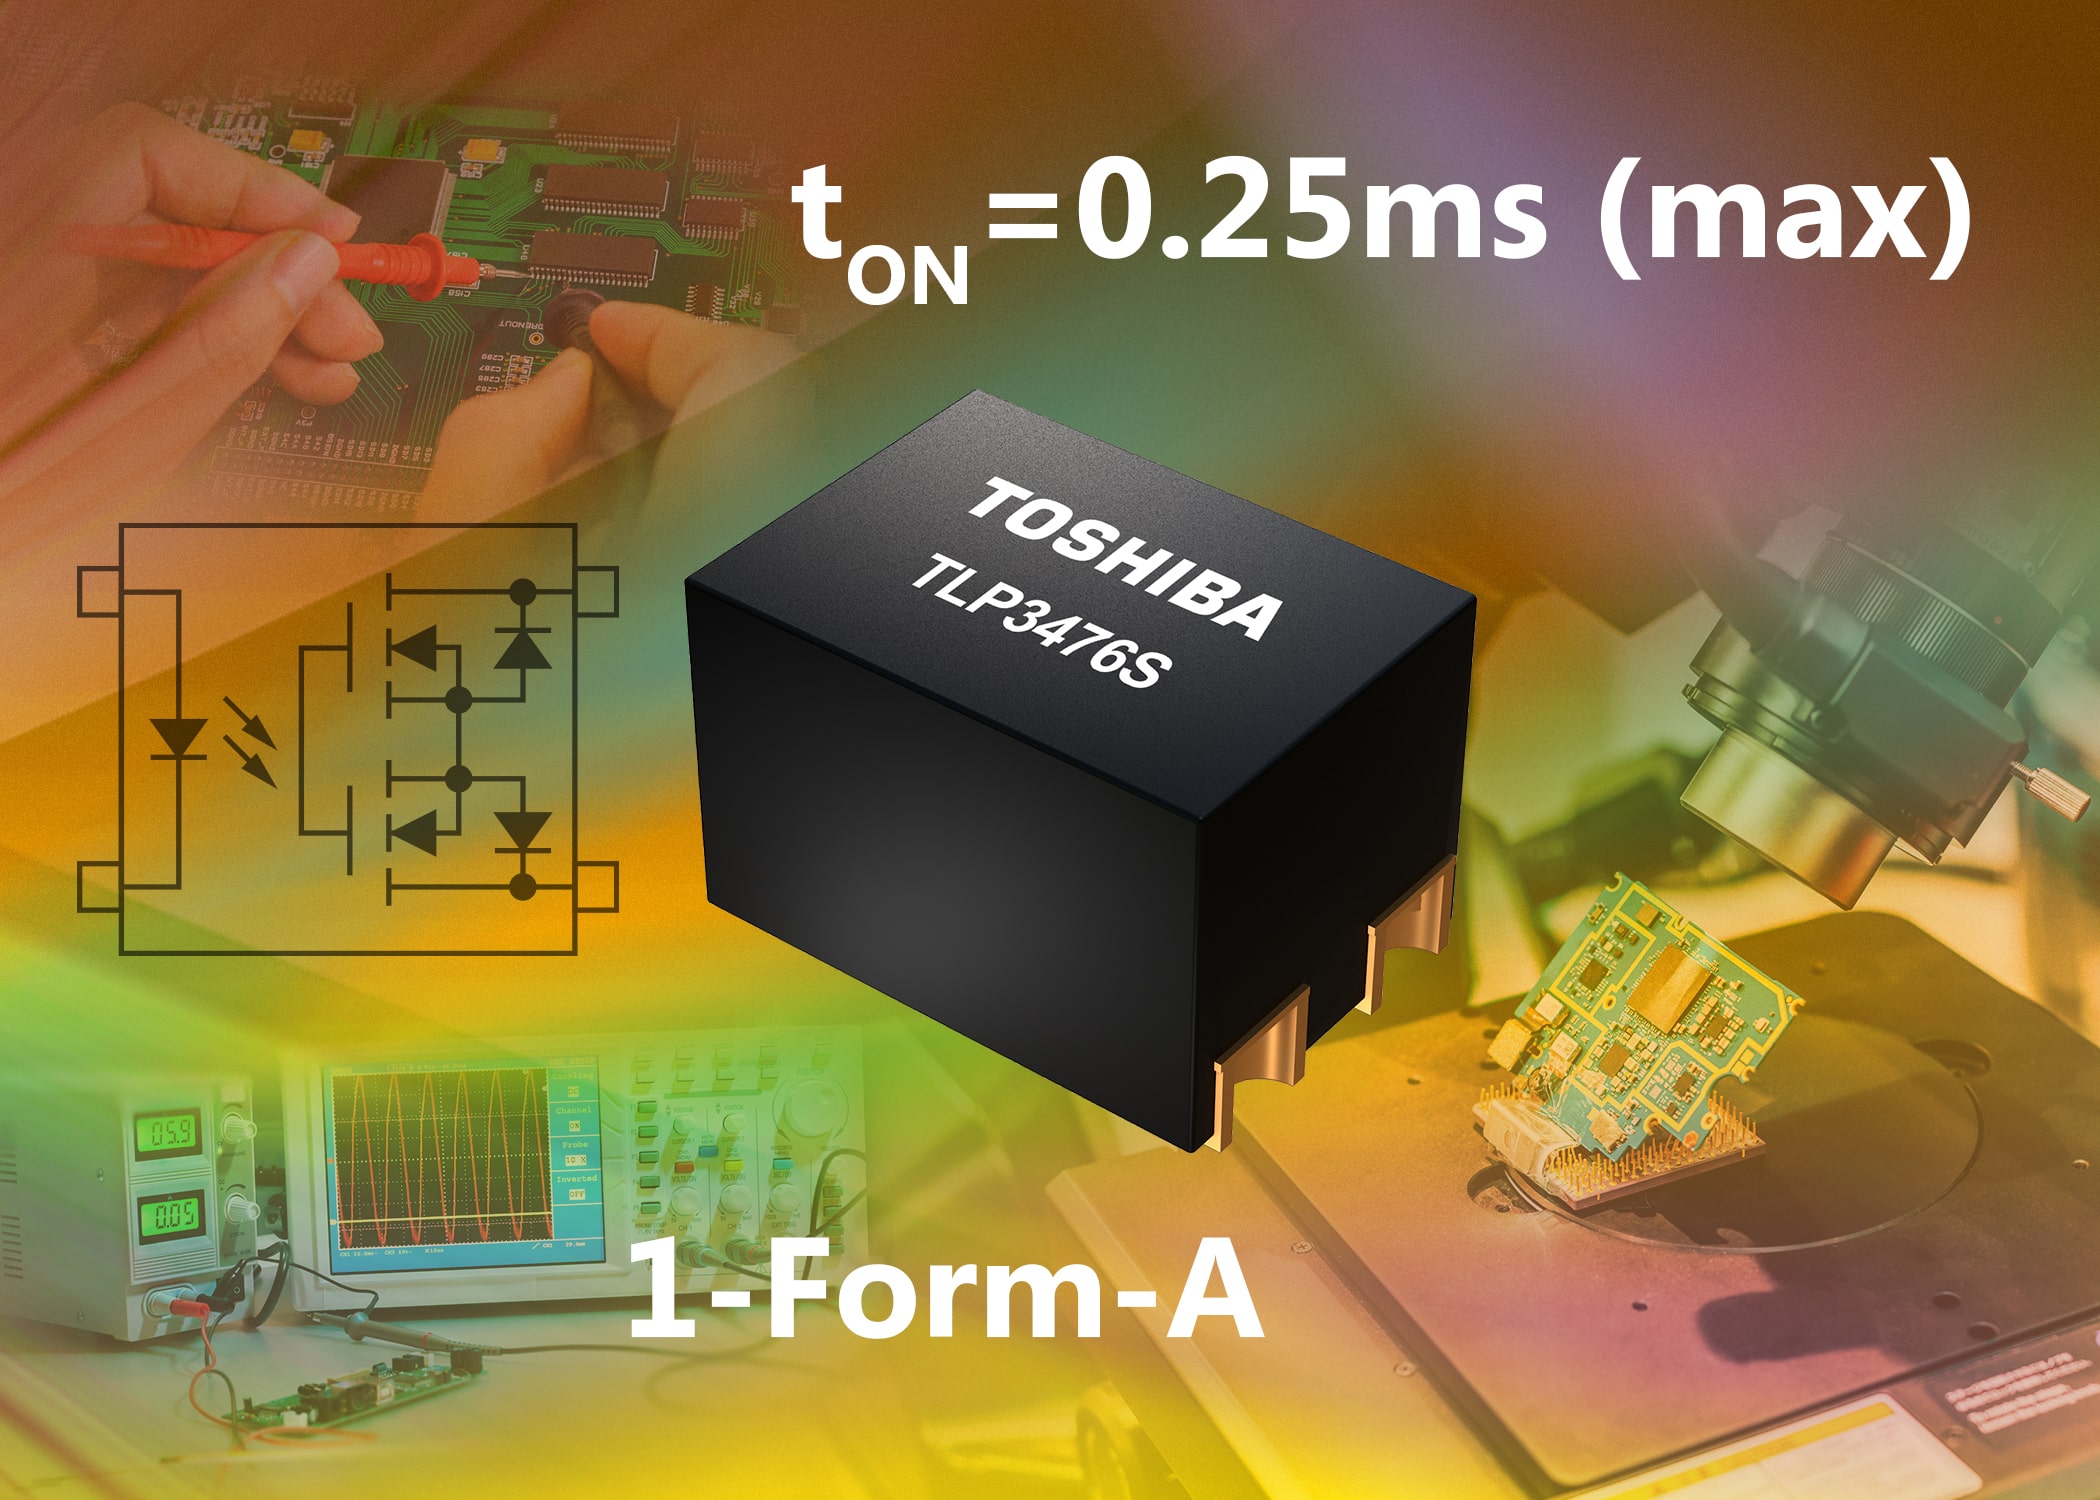 Toshiba’s compact new photorelays feature maximum turn on time of only 0.25ms